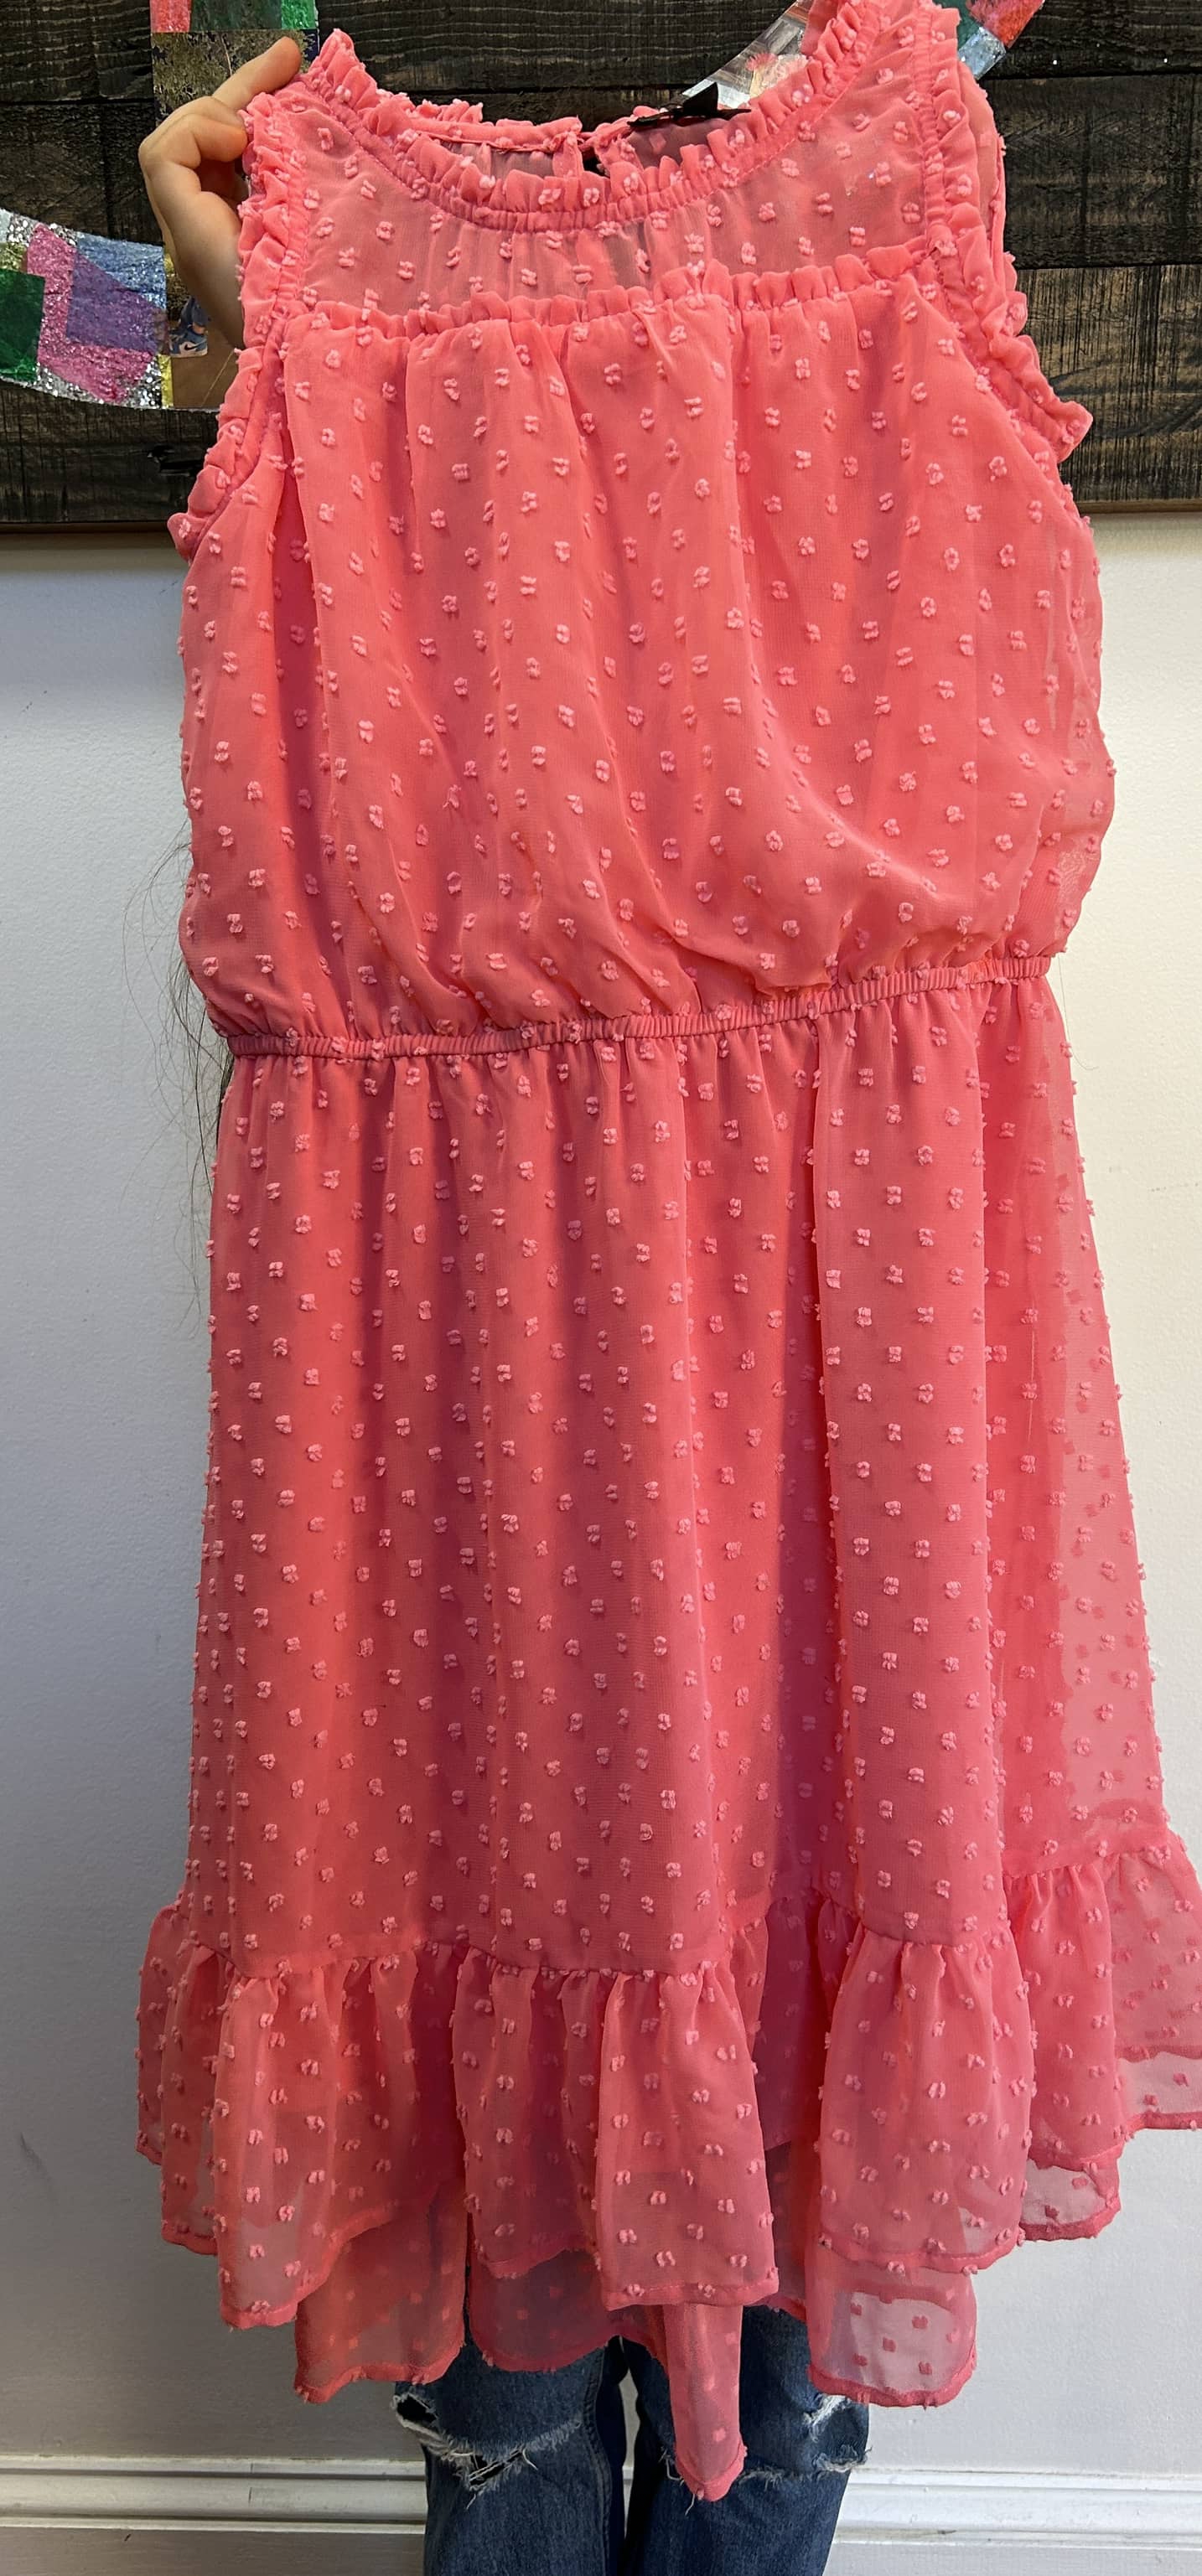 Pink Hi-Low Dress (Pre-Loved) Size 14 - Ava & Yelly